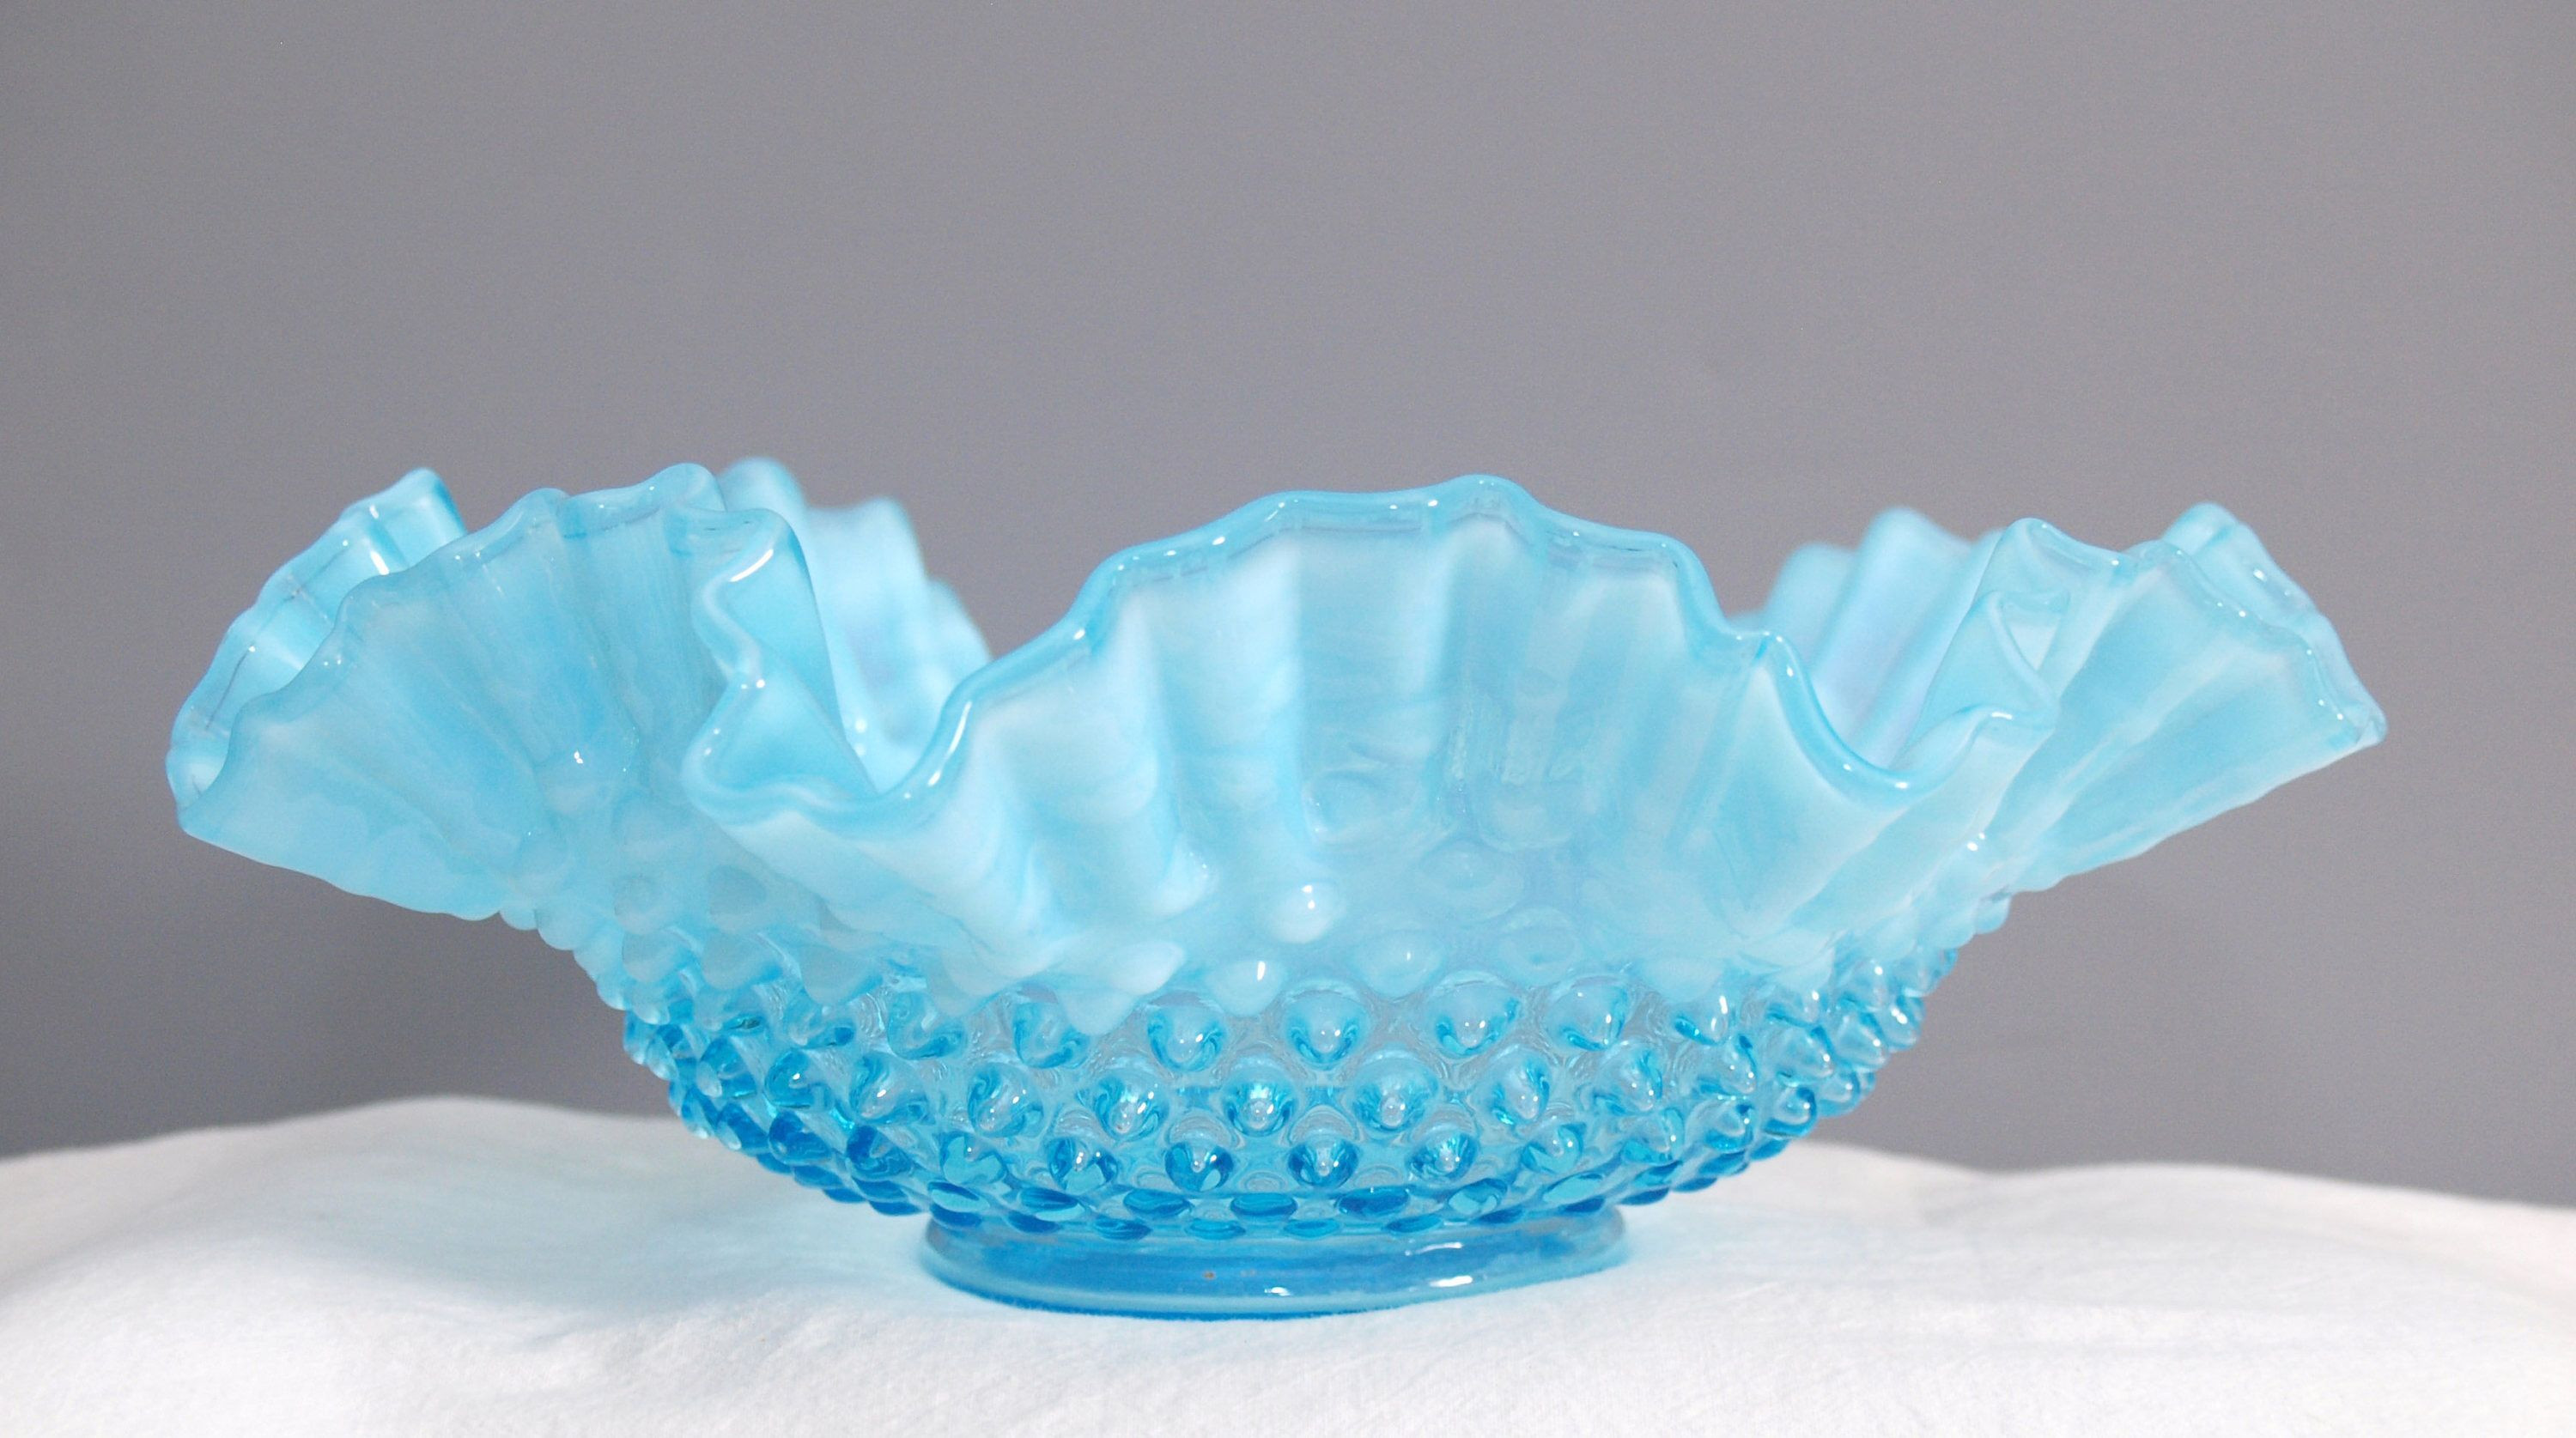 23 Lovable Tiffany Vases for Sale 2023 free download tiffany vases for sale of 37 fenton blue glass vase the weekly world pertaining to fenton blue opalescent bowl fenton pinterest